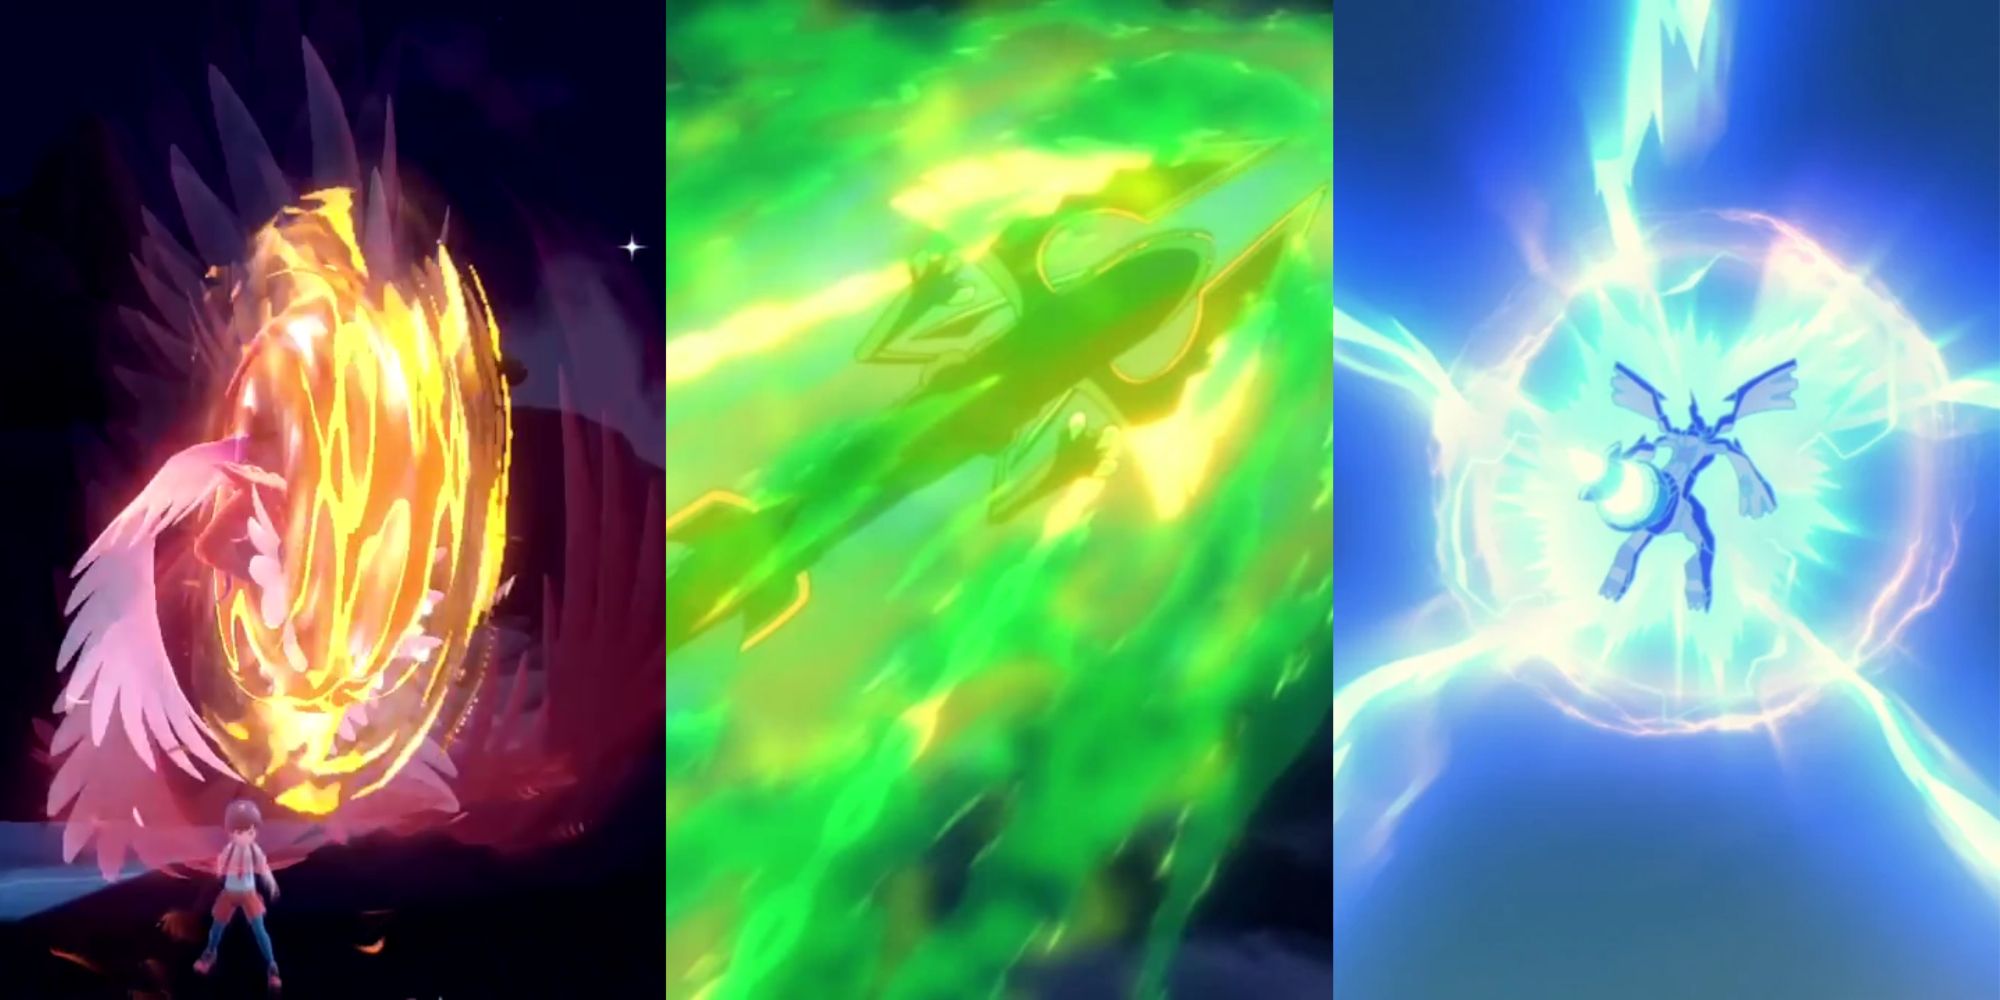 Pokemon: Koraidon, Rayquaza, and Zekrom using their signature moves Collision Course, Dragon Ascent, and Fusion Bolt